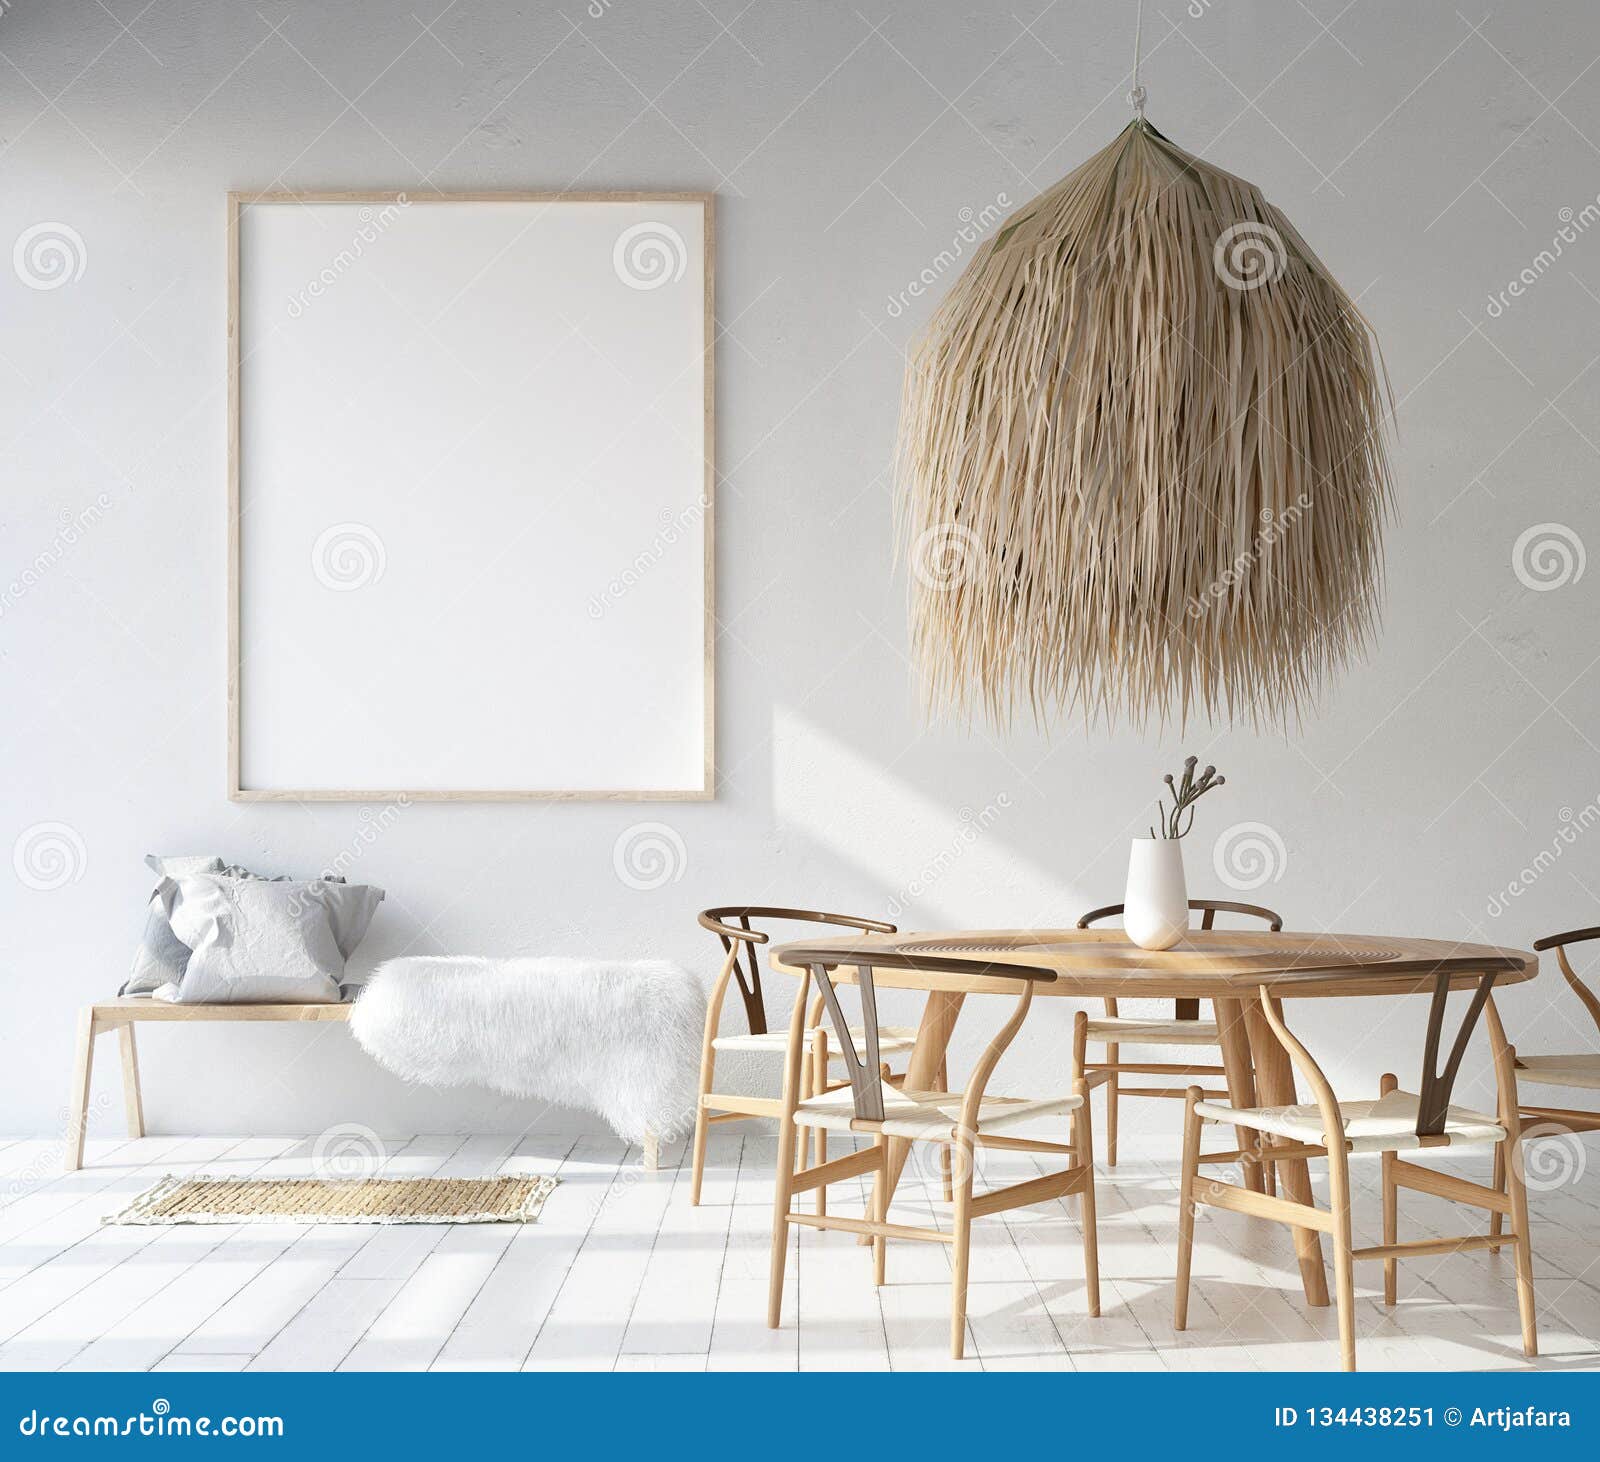 home interior with poster mockup, scandinavian bohemian style